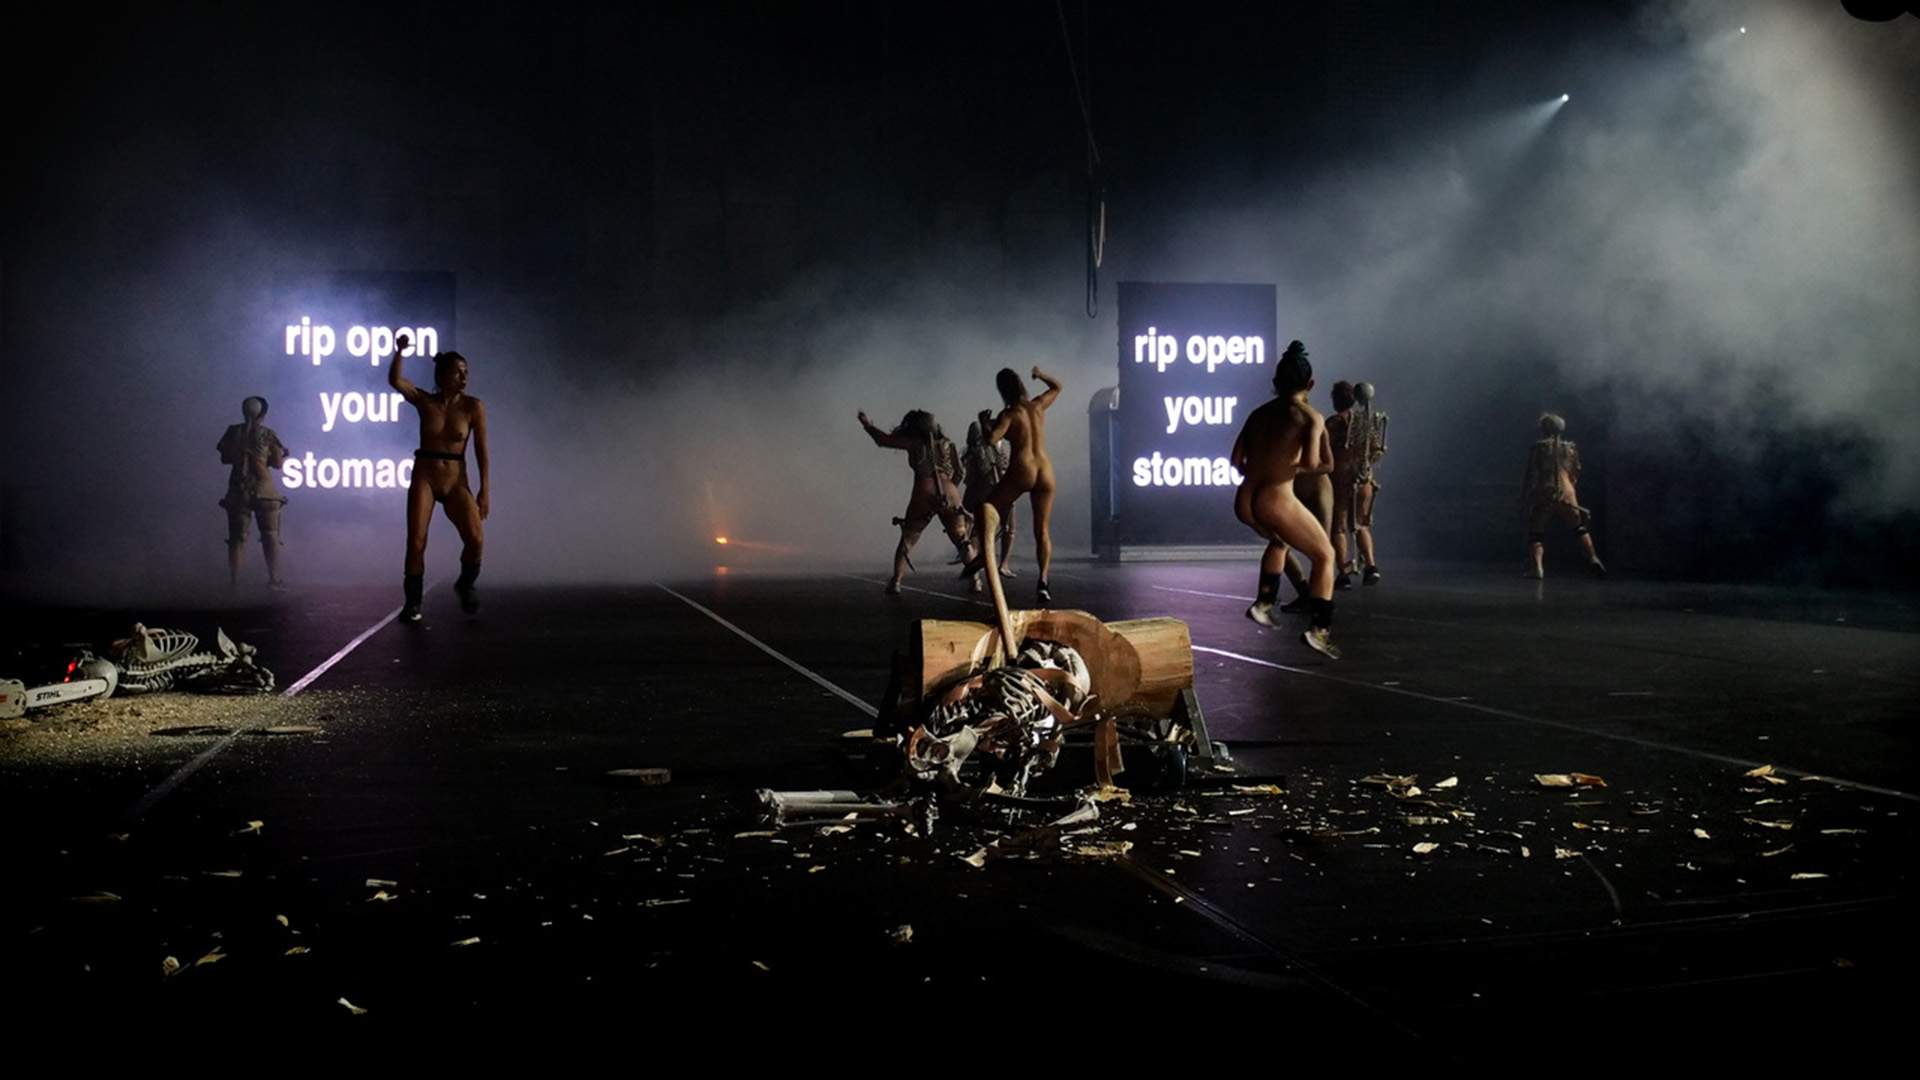 Wild Dance Theatre Performance 'A Divine Comedy' Is Dark Mofo's First Must-See Show for 2023